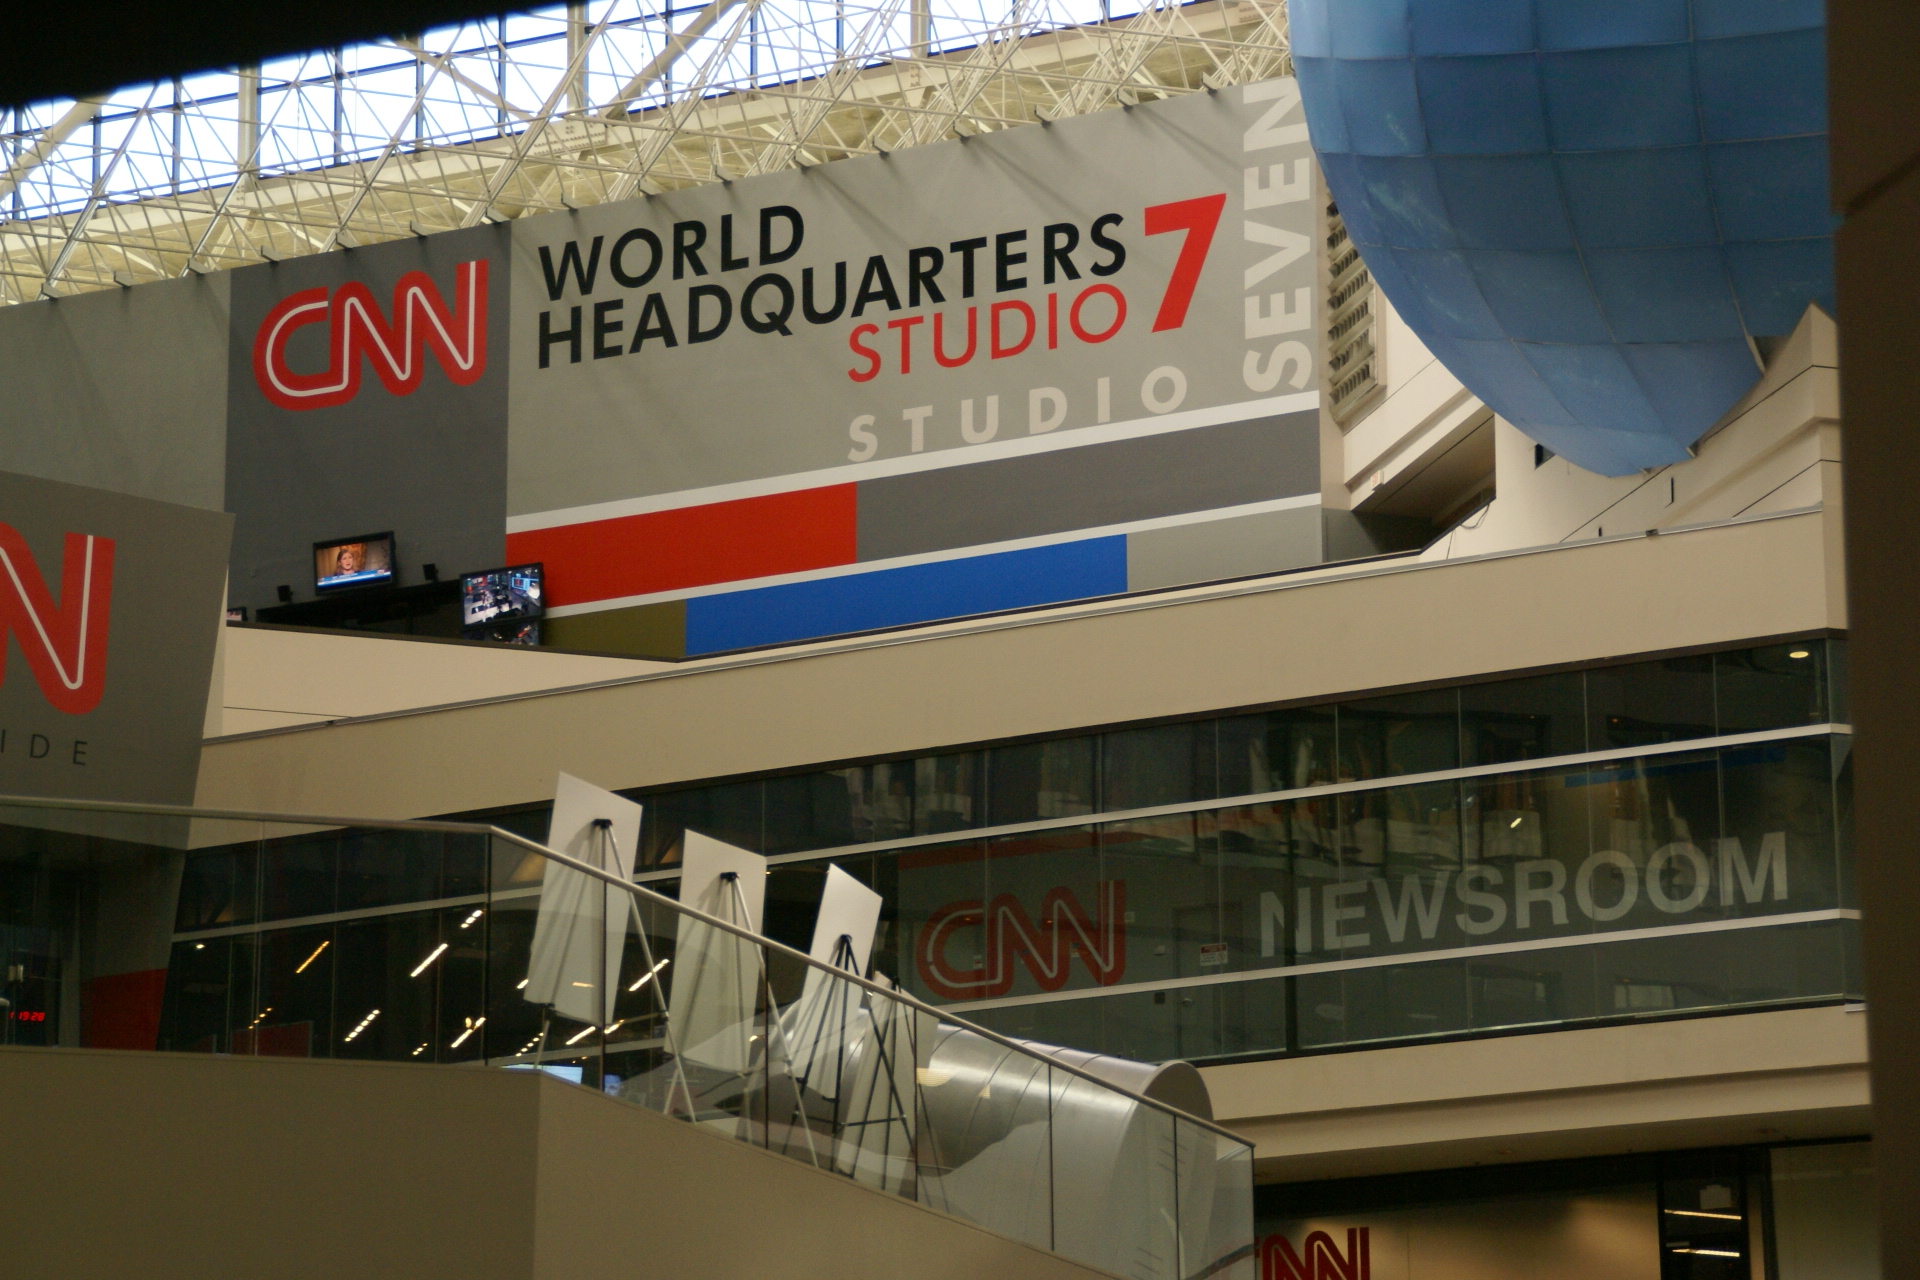 Surprise! Over 119 hours of undercover audio LEAKED from CNN headquarters